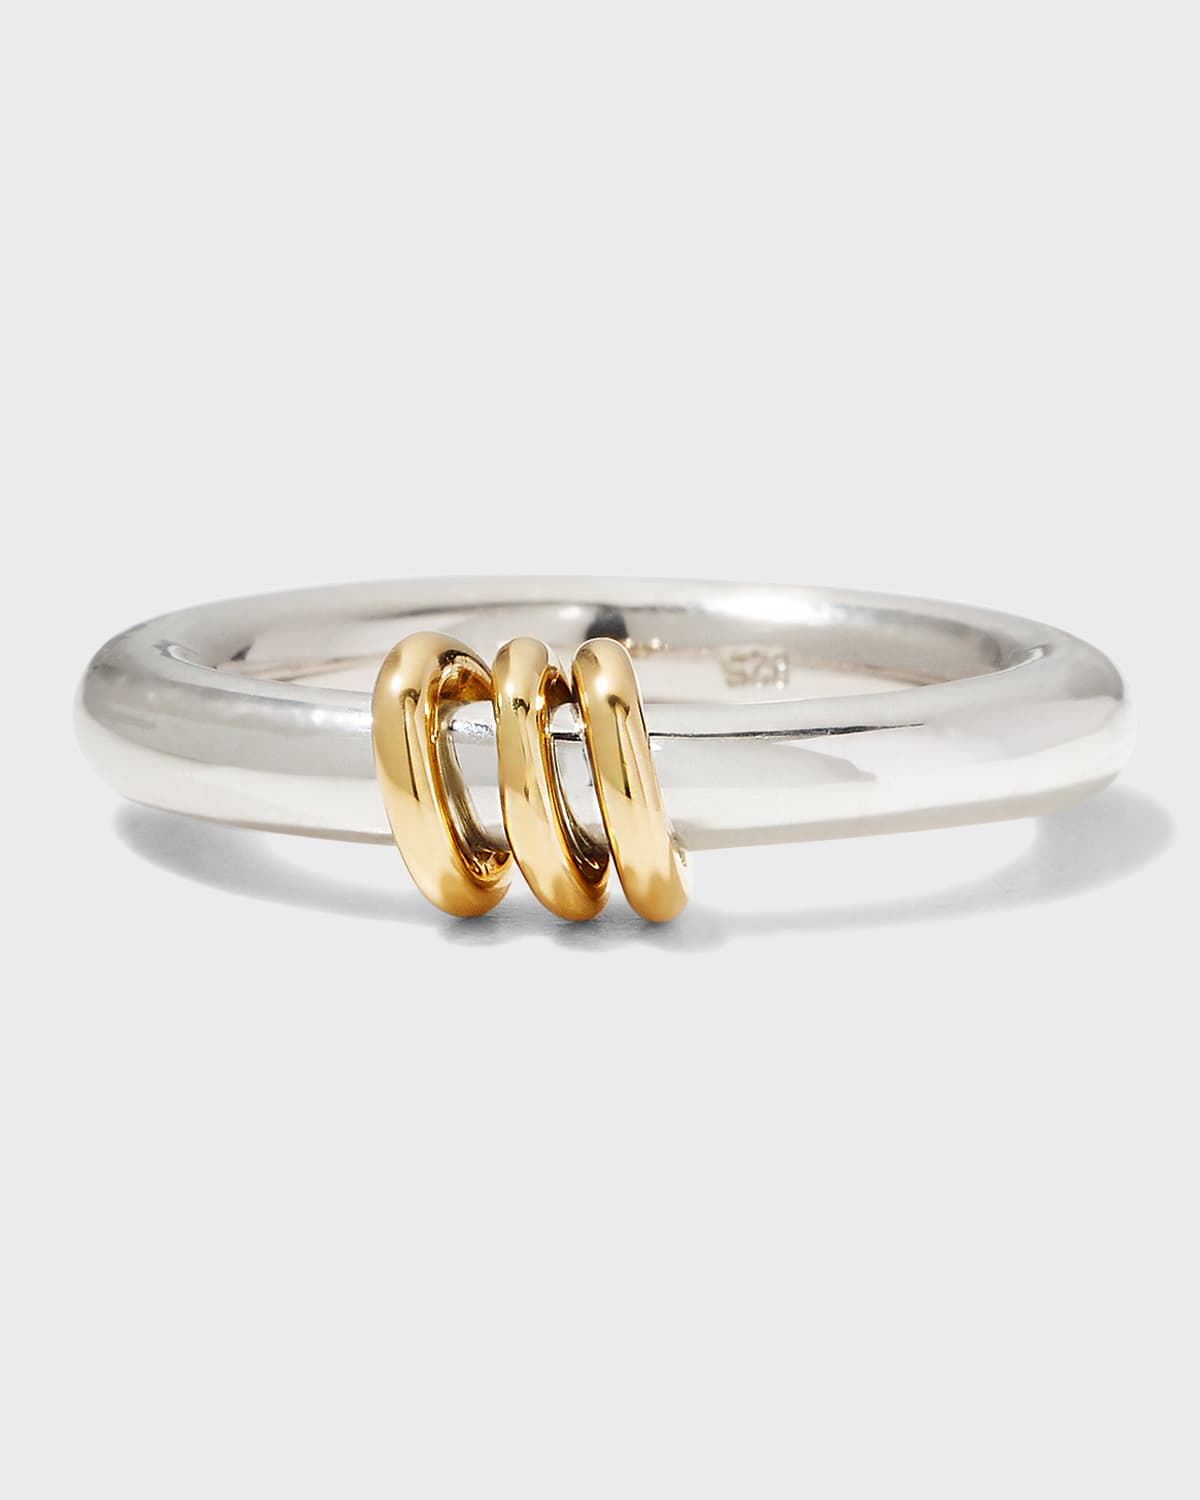 Spinelli Kilcollin Men's Sirius Max Sg 3.8mm Sterling Silver Band With 18k Yellow Gold Accents